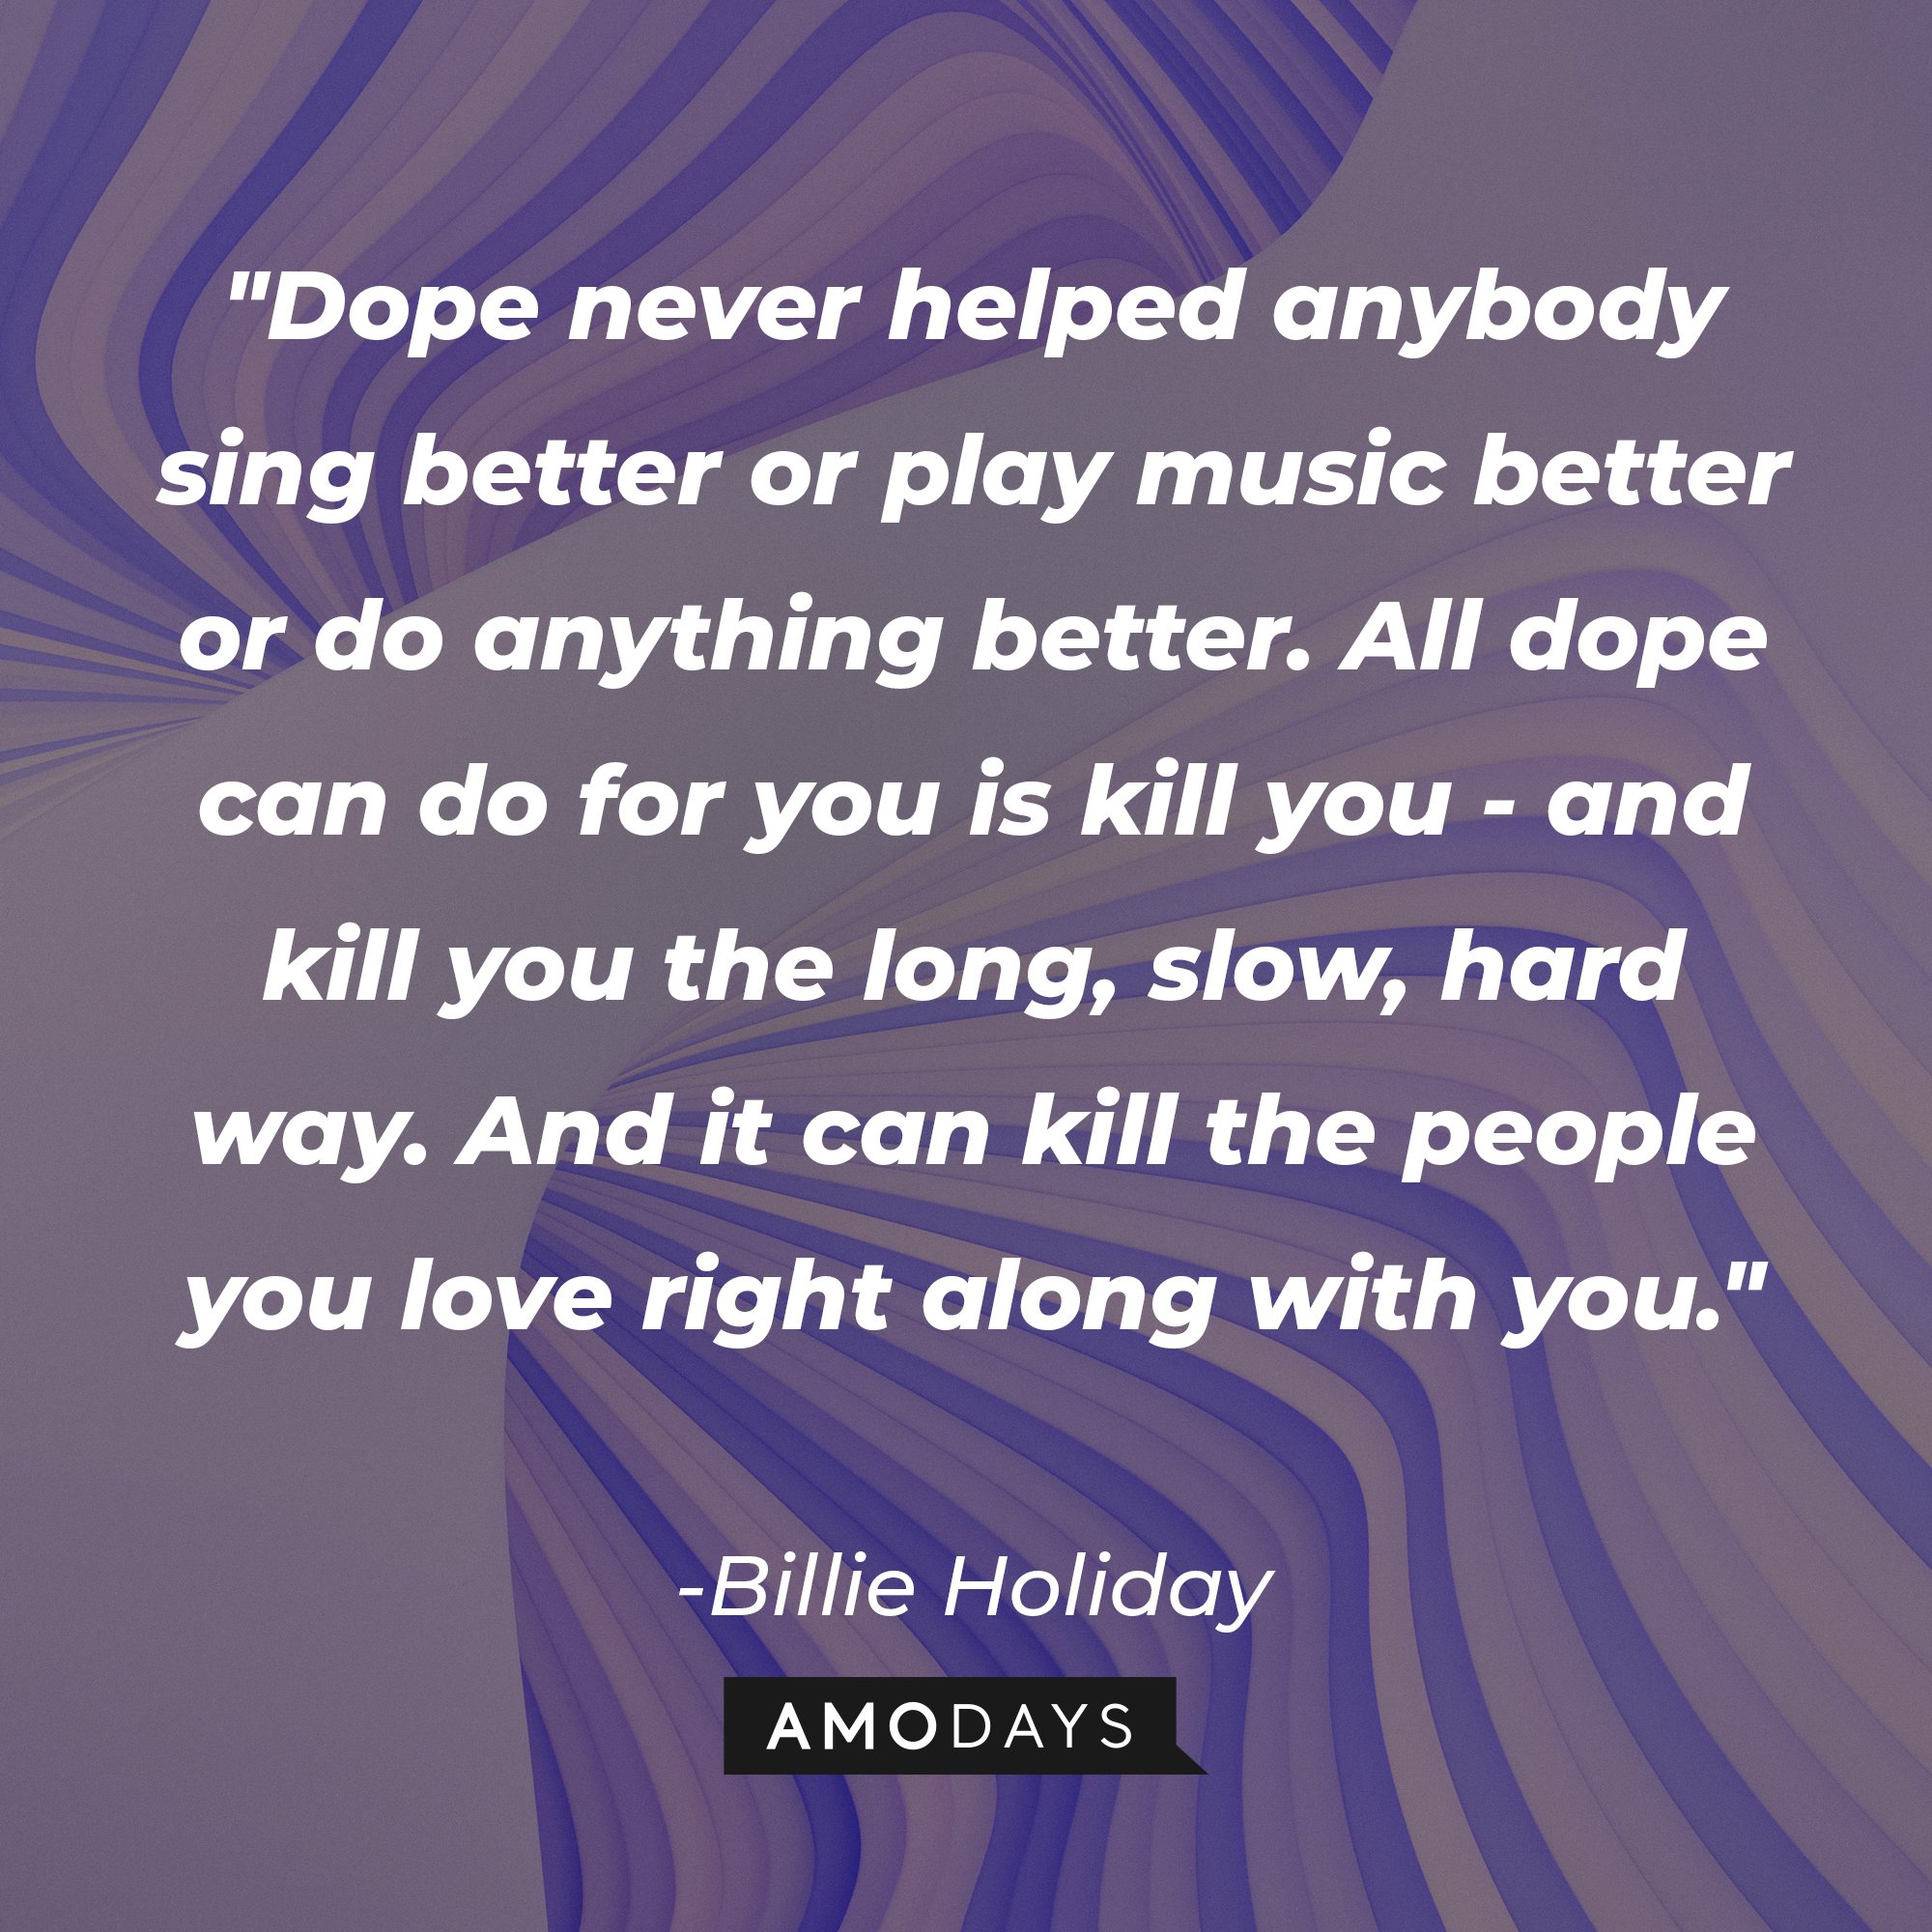 Billie Holiday's quote "Dope never helped anybody sing better or play music better or do anything better. All dope can do for you is kill you - and kill you the long, slow, hard way. And it can kill the people you love right along with you." | Source: Unsplash.com